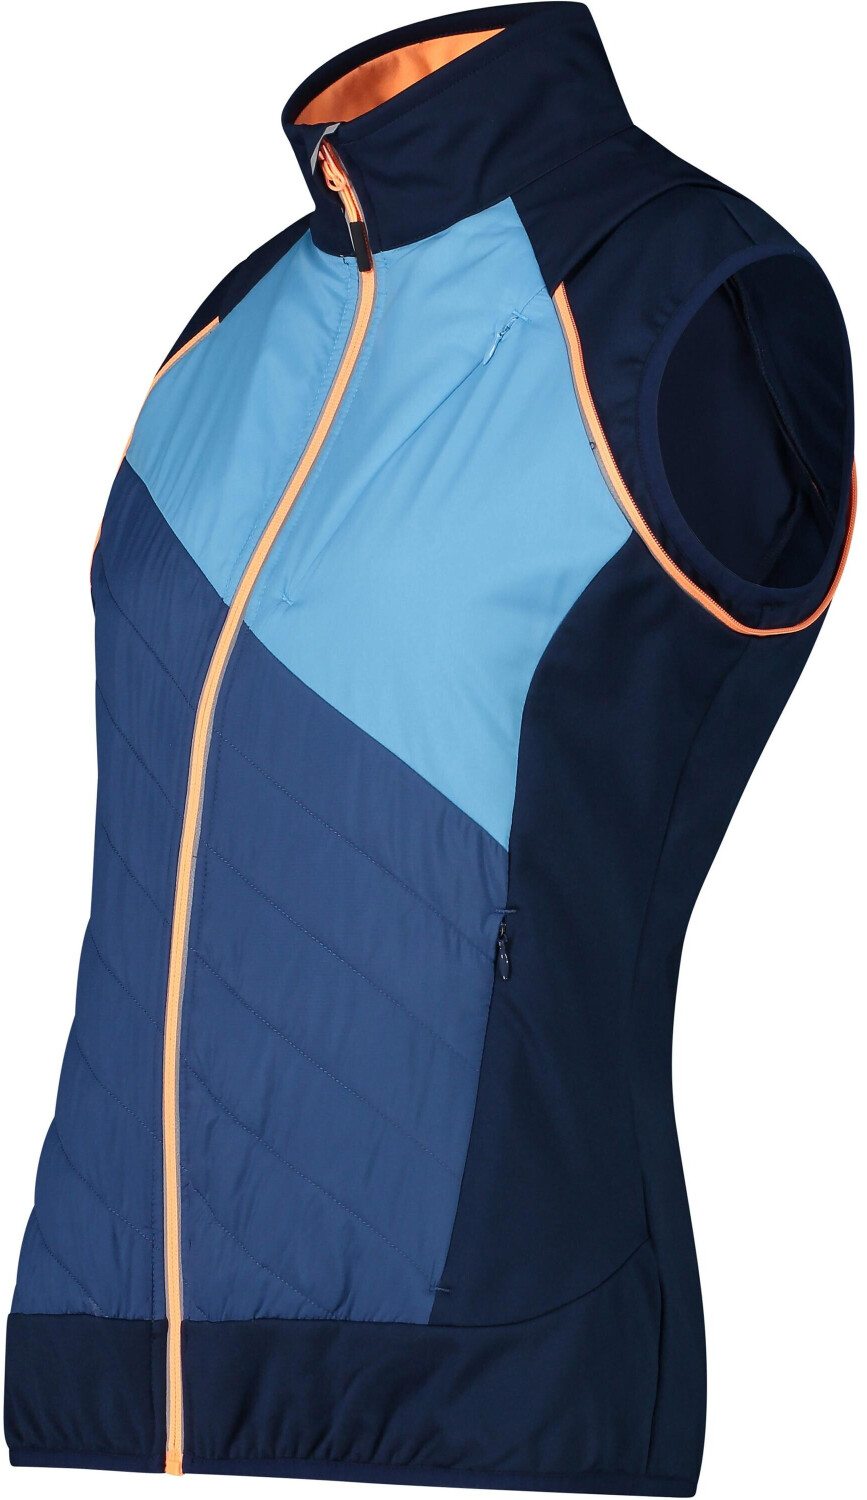 £52.99 Buy blue/dusty with from Removable CMP Women\'s Sleeves Deals blue – (Today) on Hybrid Best (30A2276) Jacket